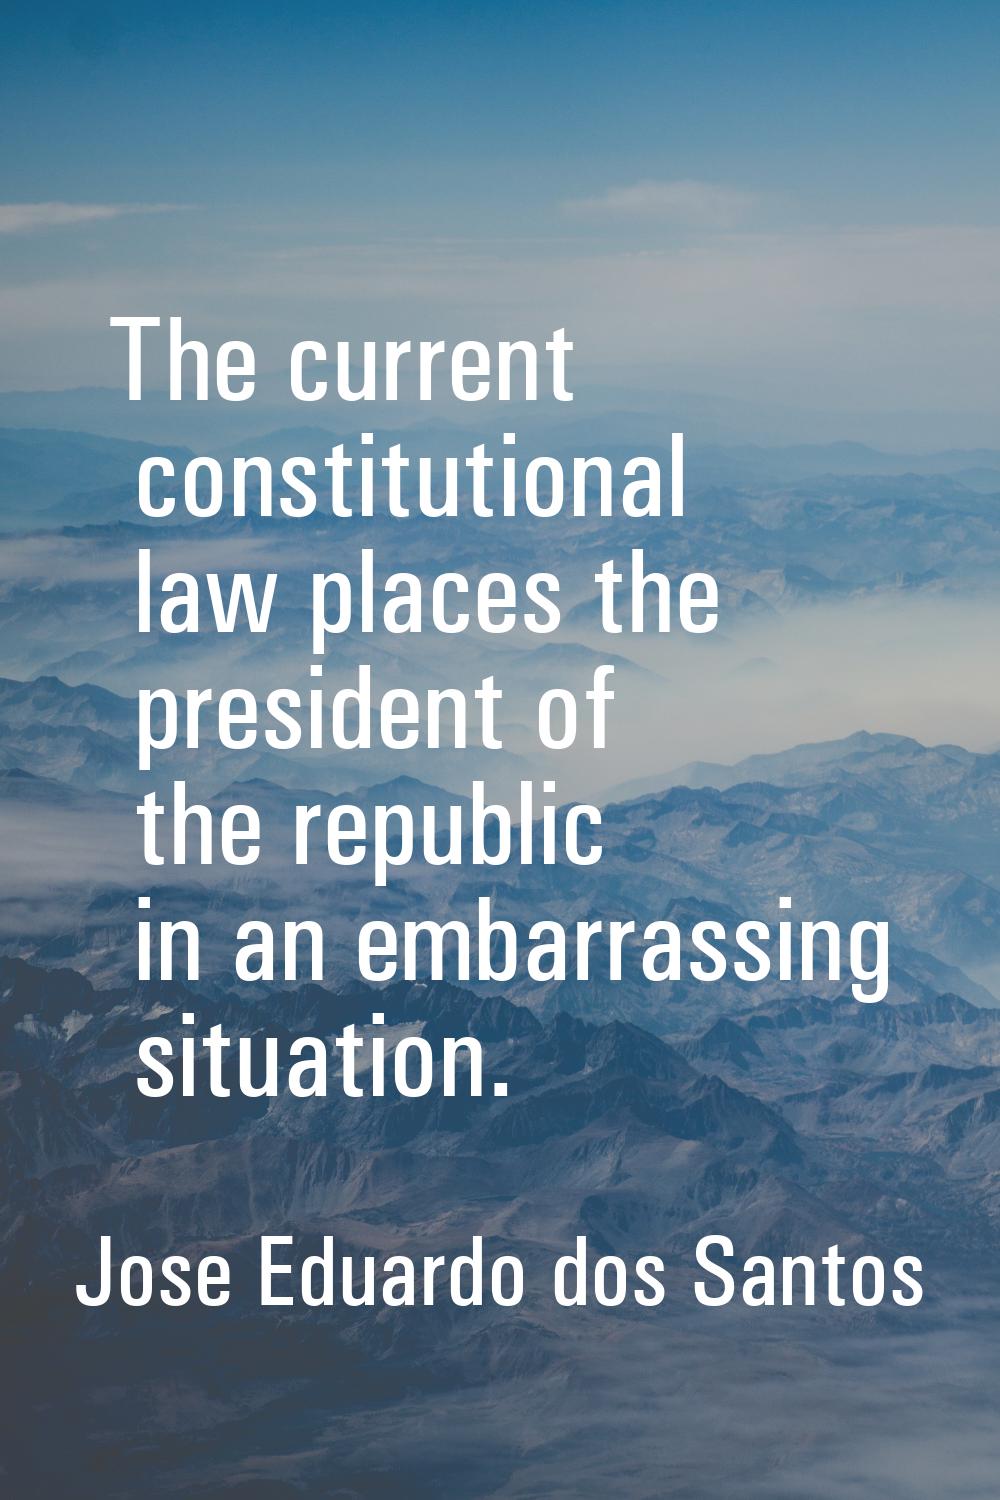 The current constitutional law places the president of the republic in an embarrassing situation.